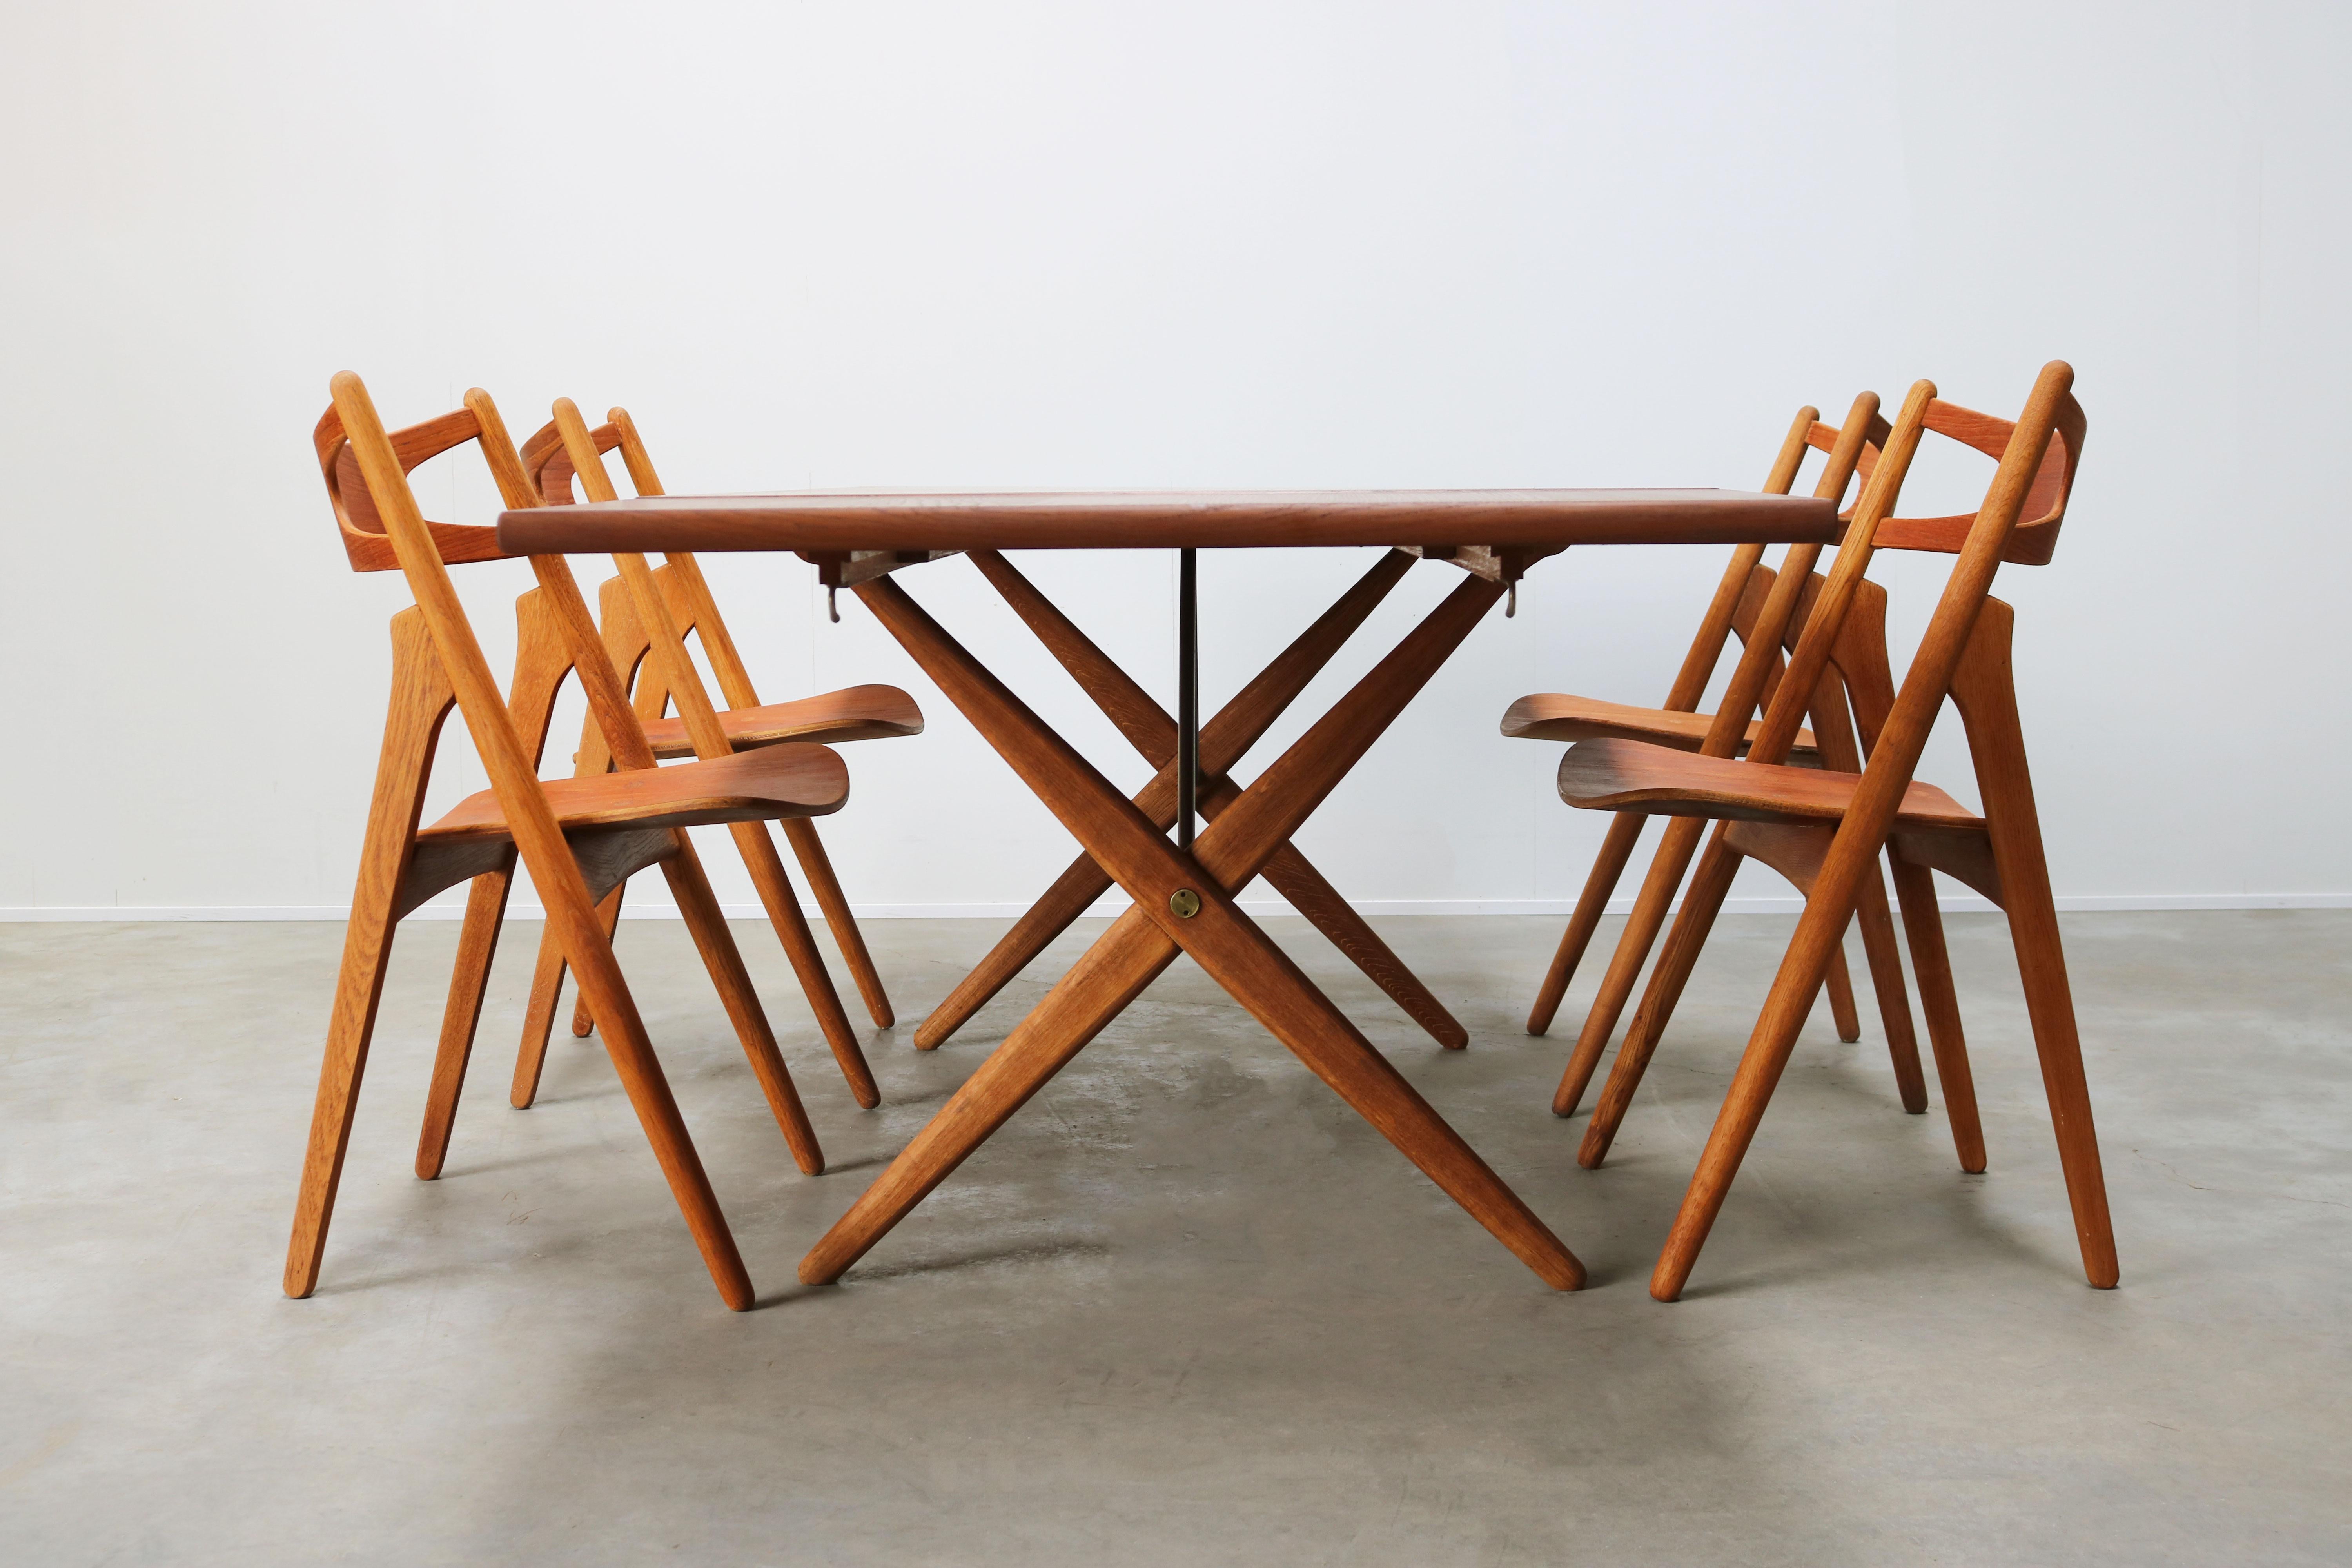 Wonderful Danish design dining room set by famous Danish design grandmaster: Hans J. Wegner for Andreas Tuck in the 1950s. The set consist of four Sawbuck chairs Model: CH29 and a cross-leg model: AT-309 table with extendable table leaves. Wonderful